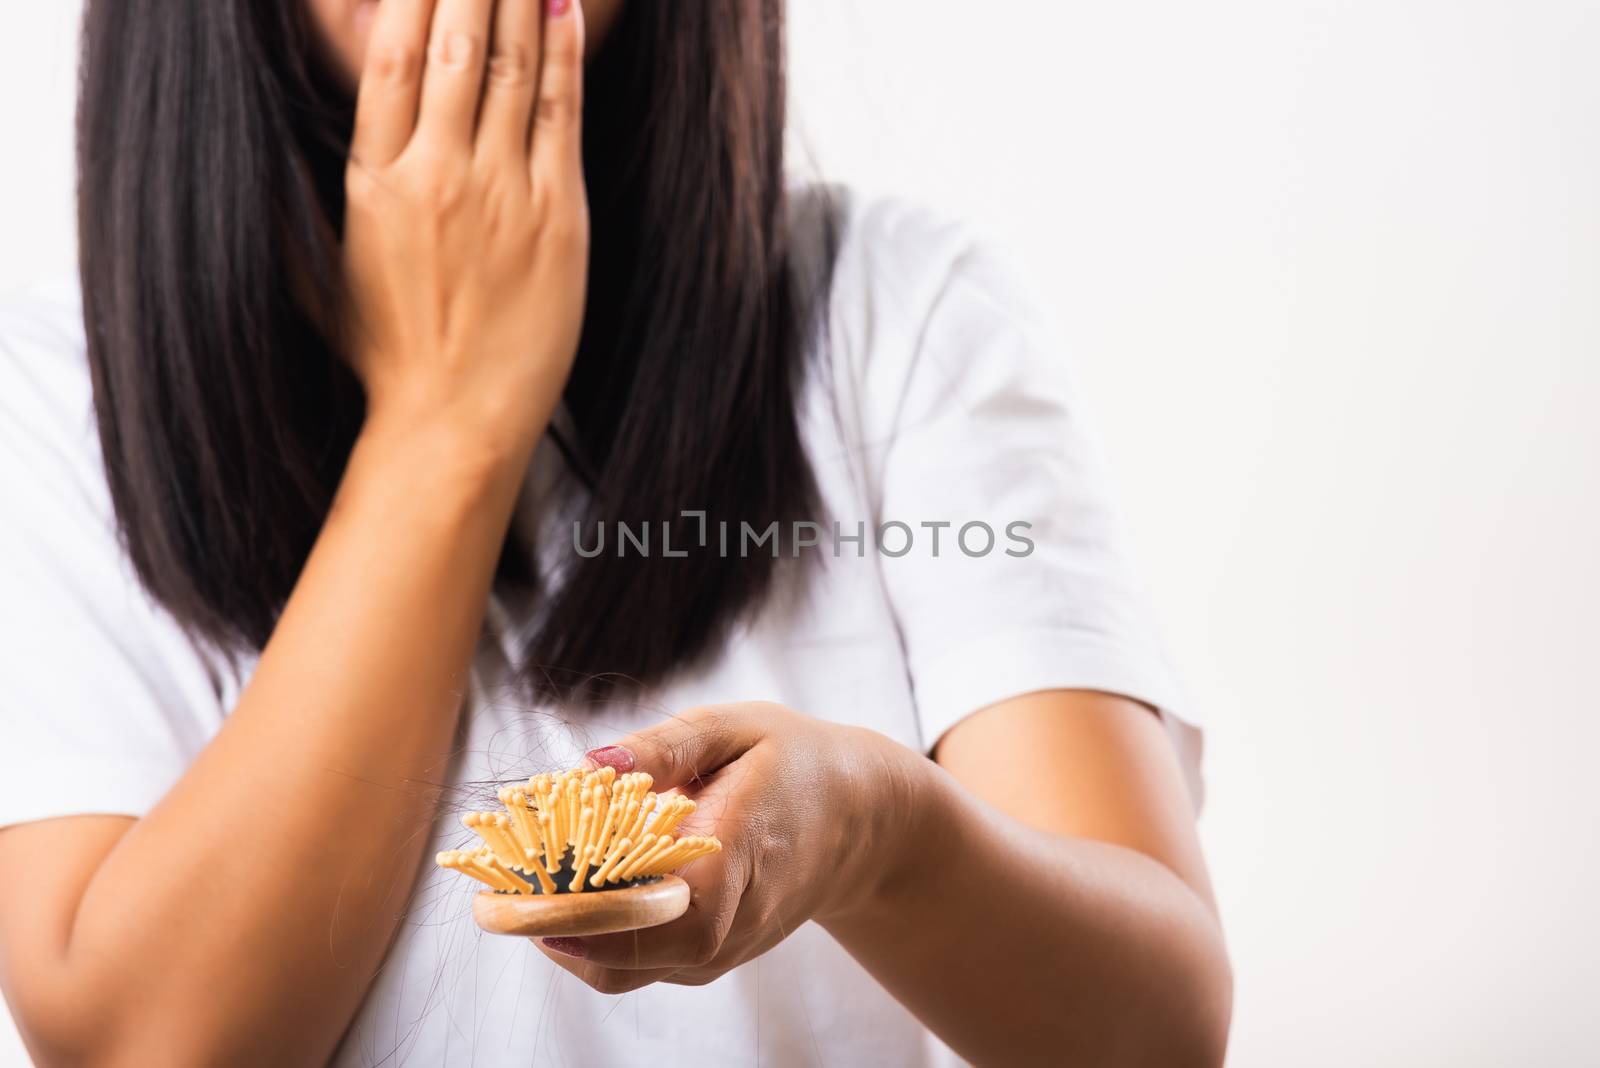 Asian woman unhappy weak hair problem her hold hairbrush with damaged long loss hair in the comb brush on hand and she shocked use hand cover mouth, isolated on white background, Medicine health care